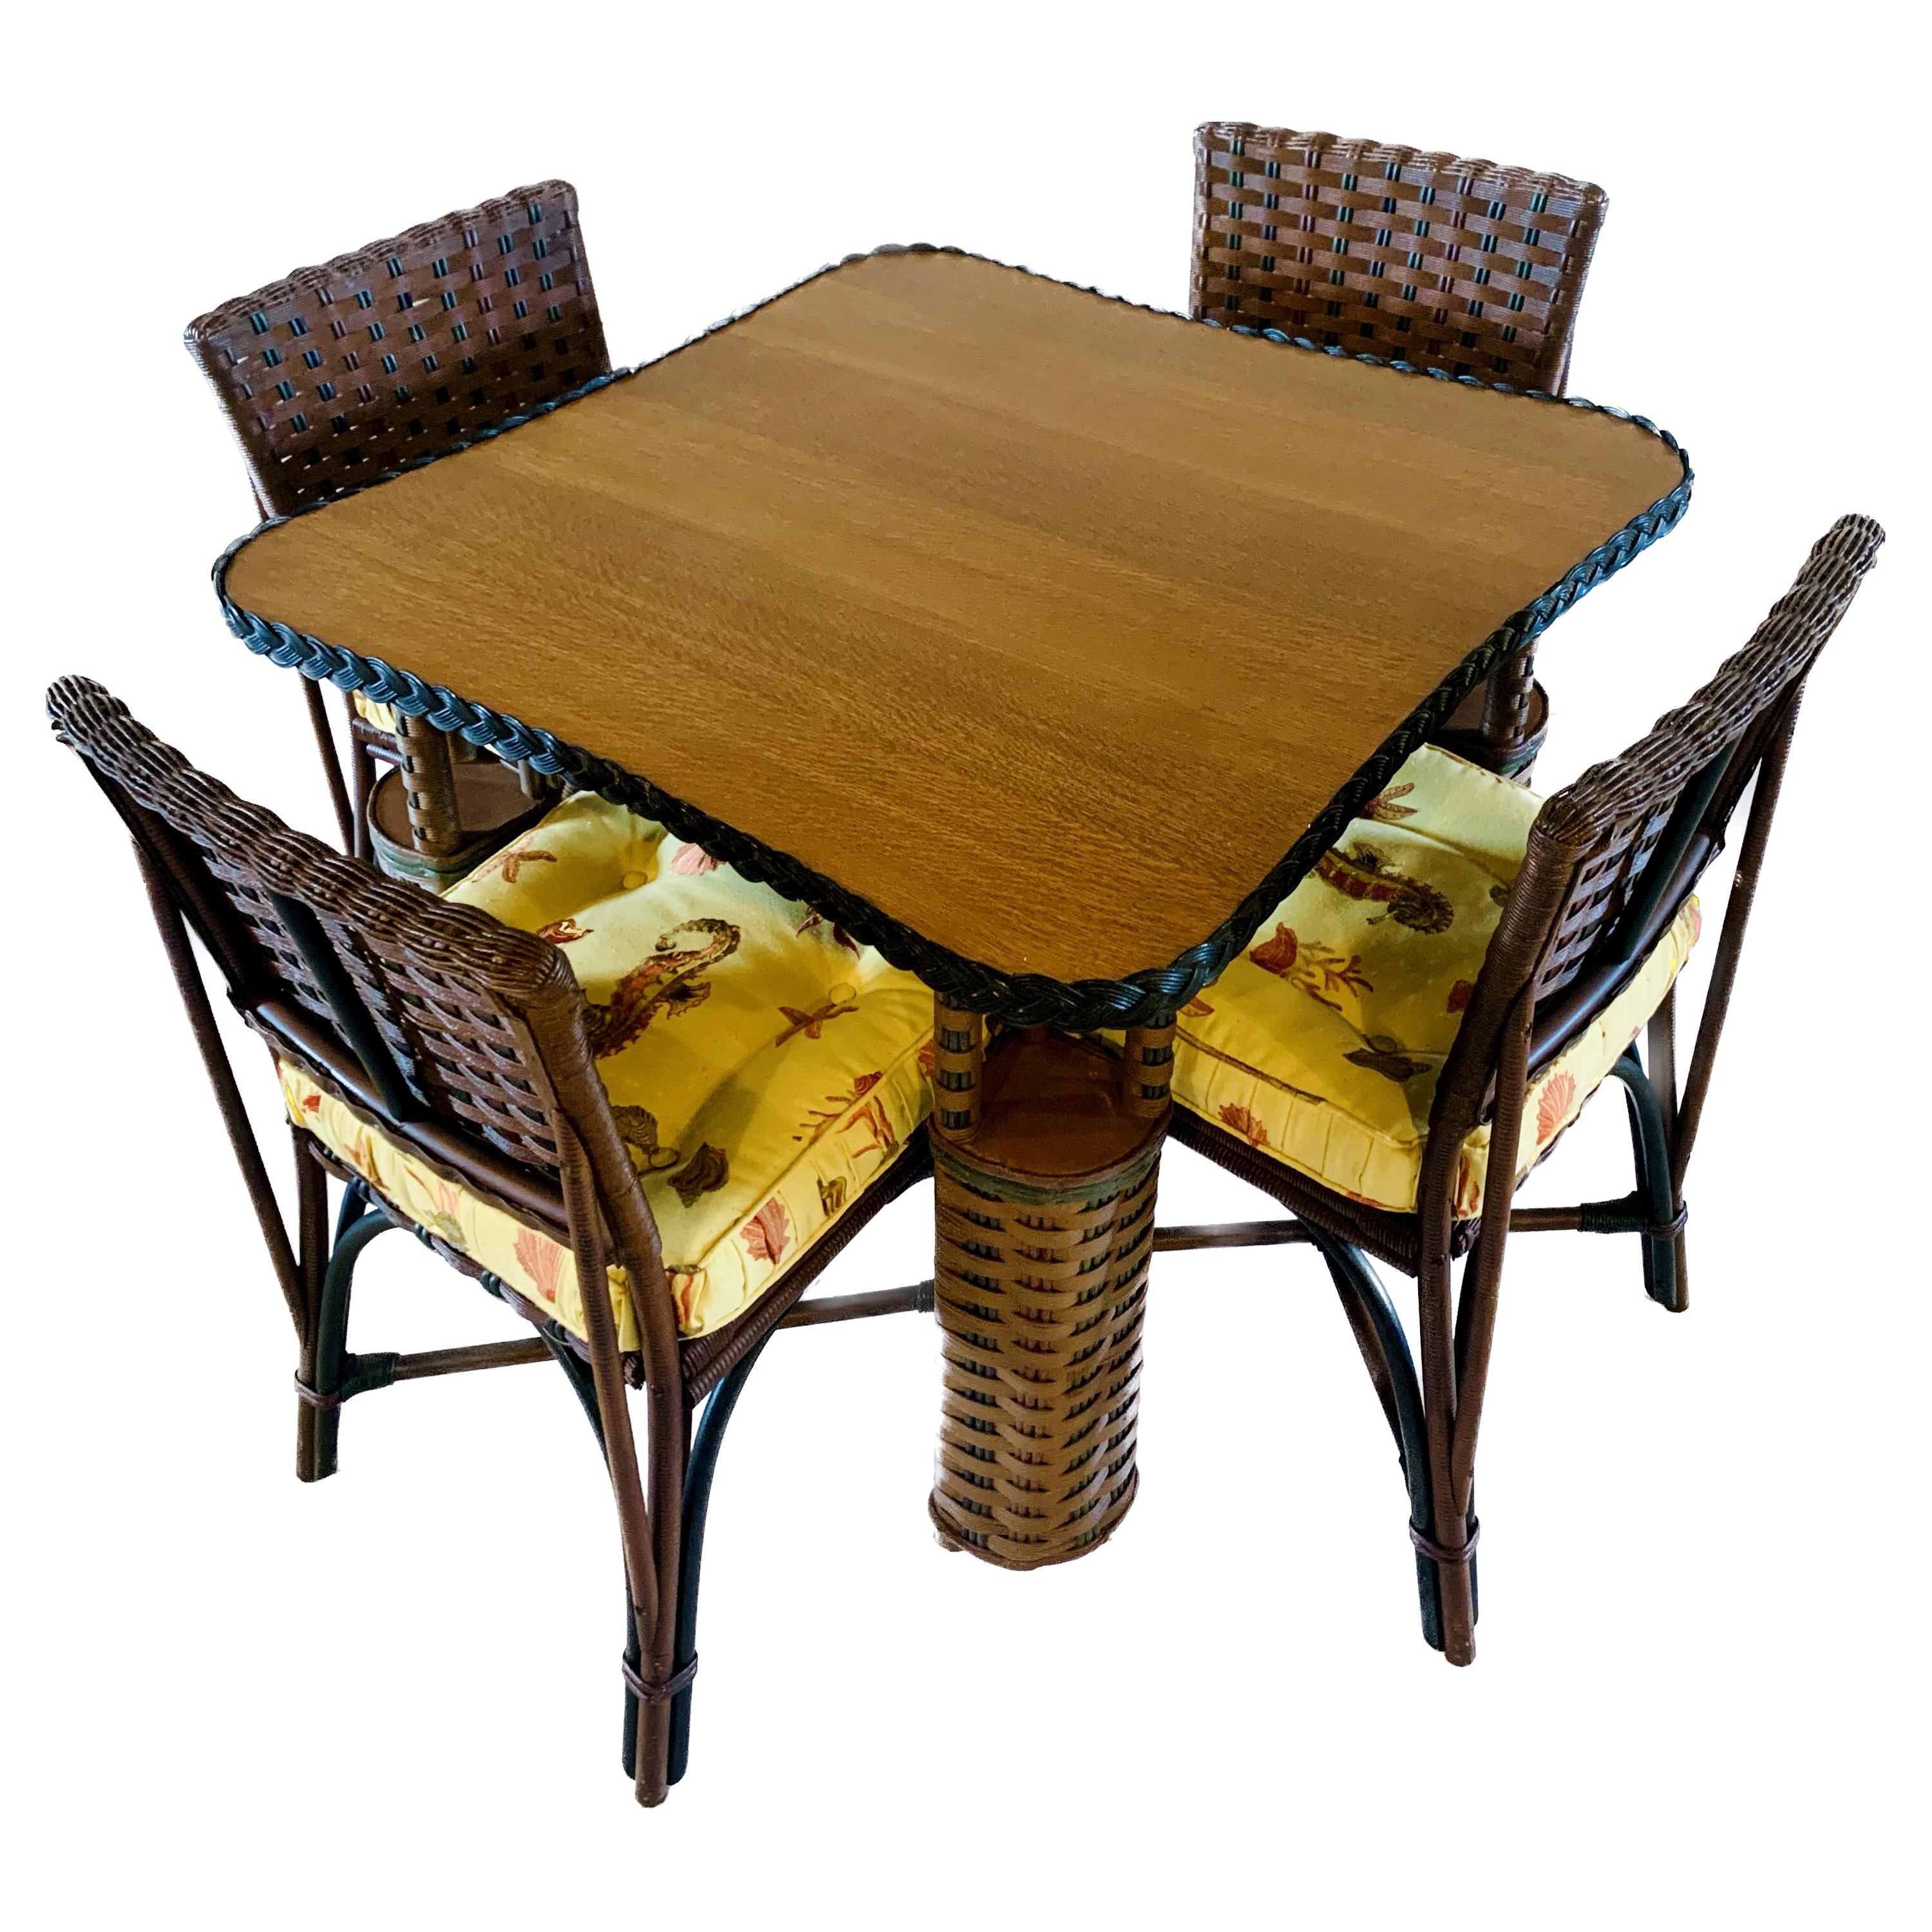 A very rare matching and unique card / game table with four matching chairs.The five piece matching set consists of a natural finished quarter sawn oak topped game table and four matching chairs. The table and chair bodies are done in a beautiful